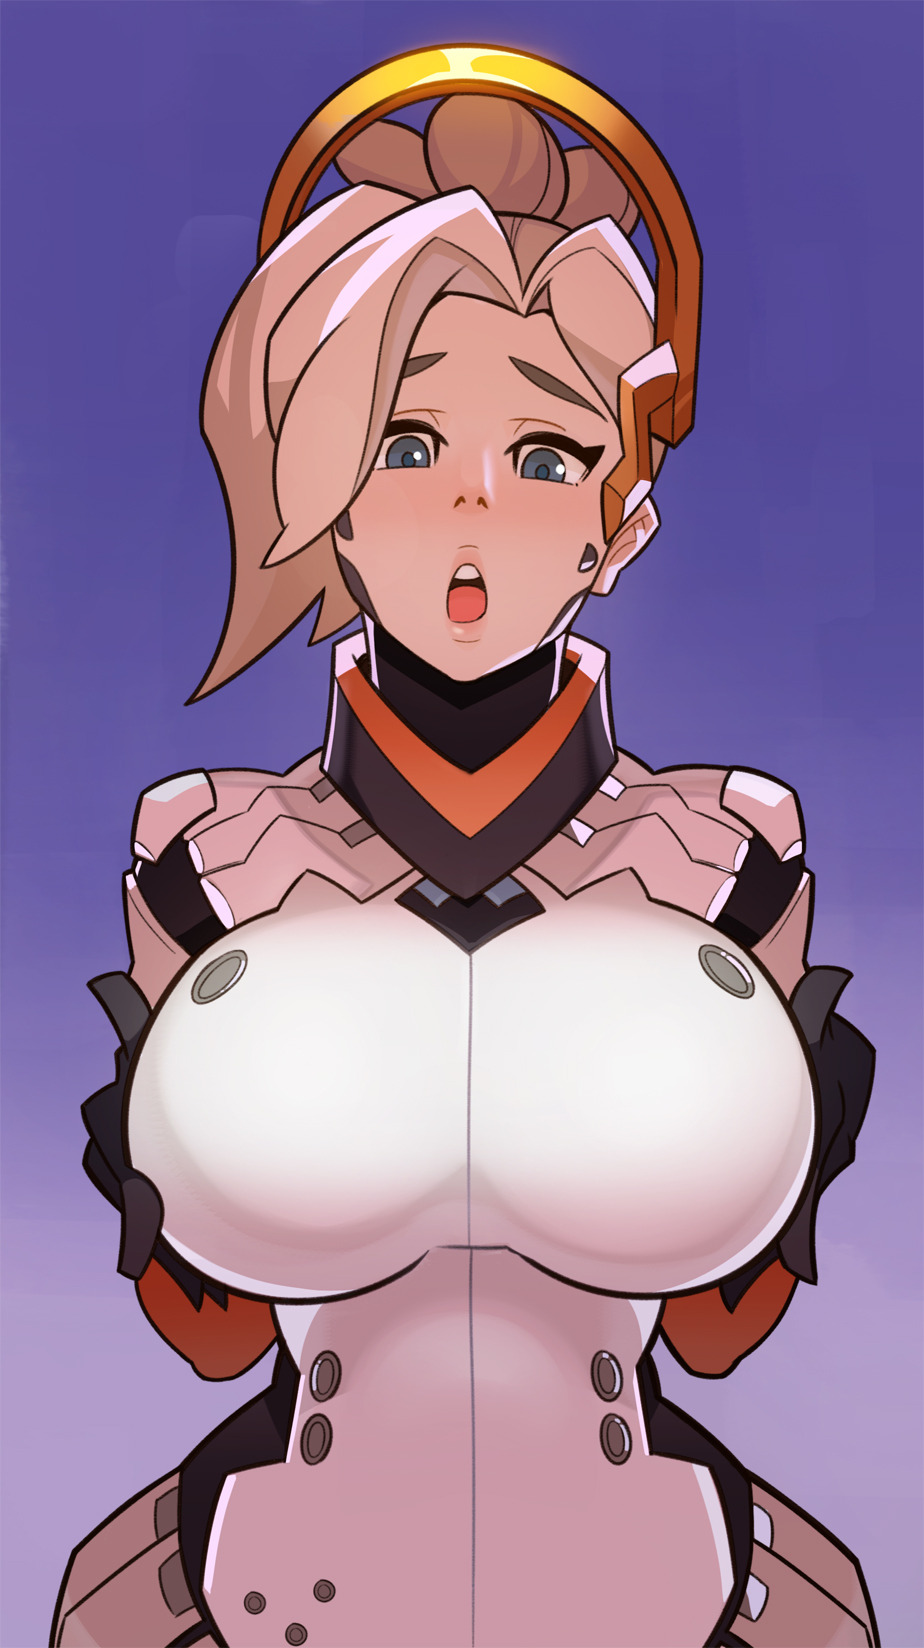 diane tesch recommends overwatch mercy rule 34 pic